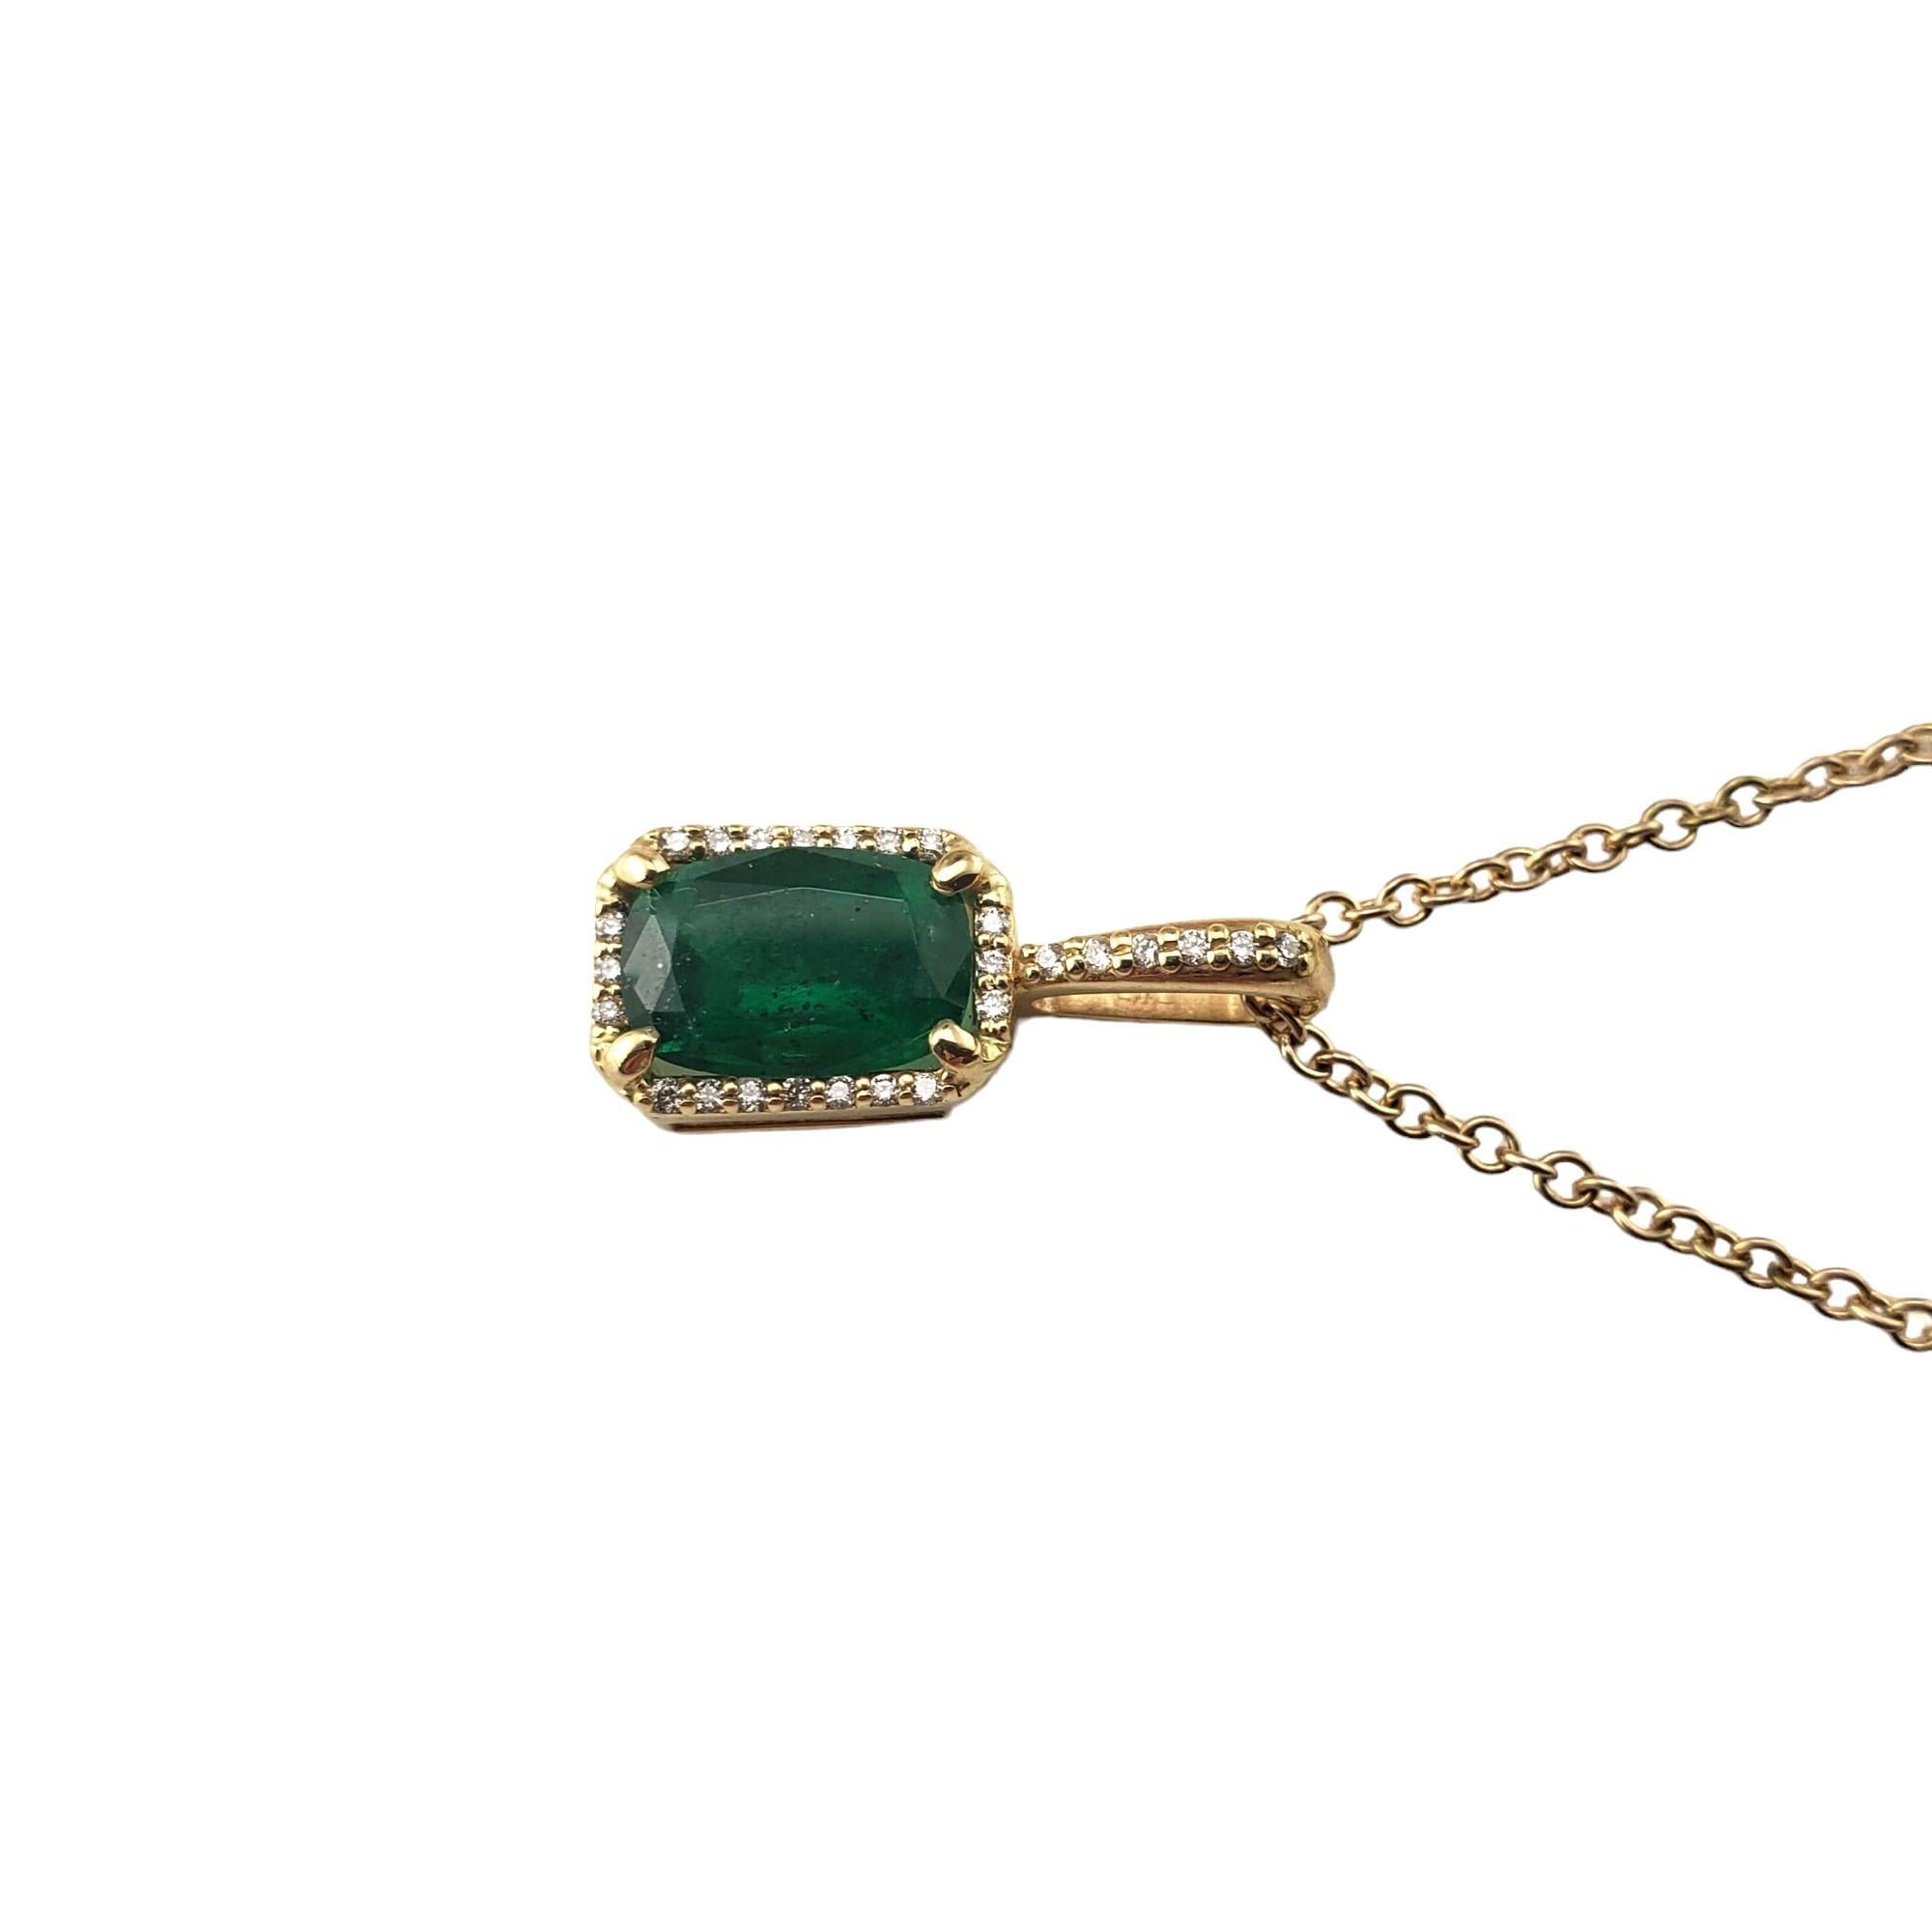 Vintage 14K Yellow Gold Emerald and Diamond Pendant Necklace-

This elegant pendant necklace features one oval cut natural emerald (8.7 mm x 6.0 mm) and 26 round brilliant cut diamonds set in classic 14K yellow gold.

Emerald weight:  1.20